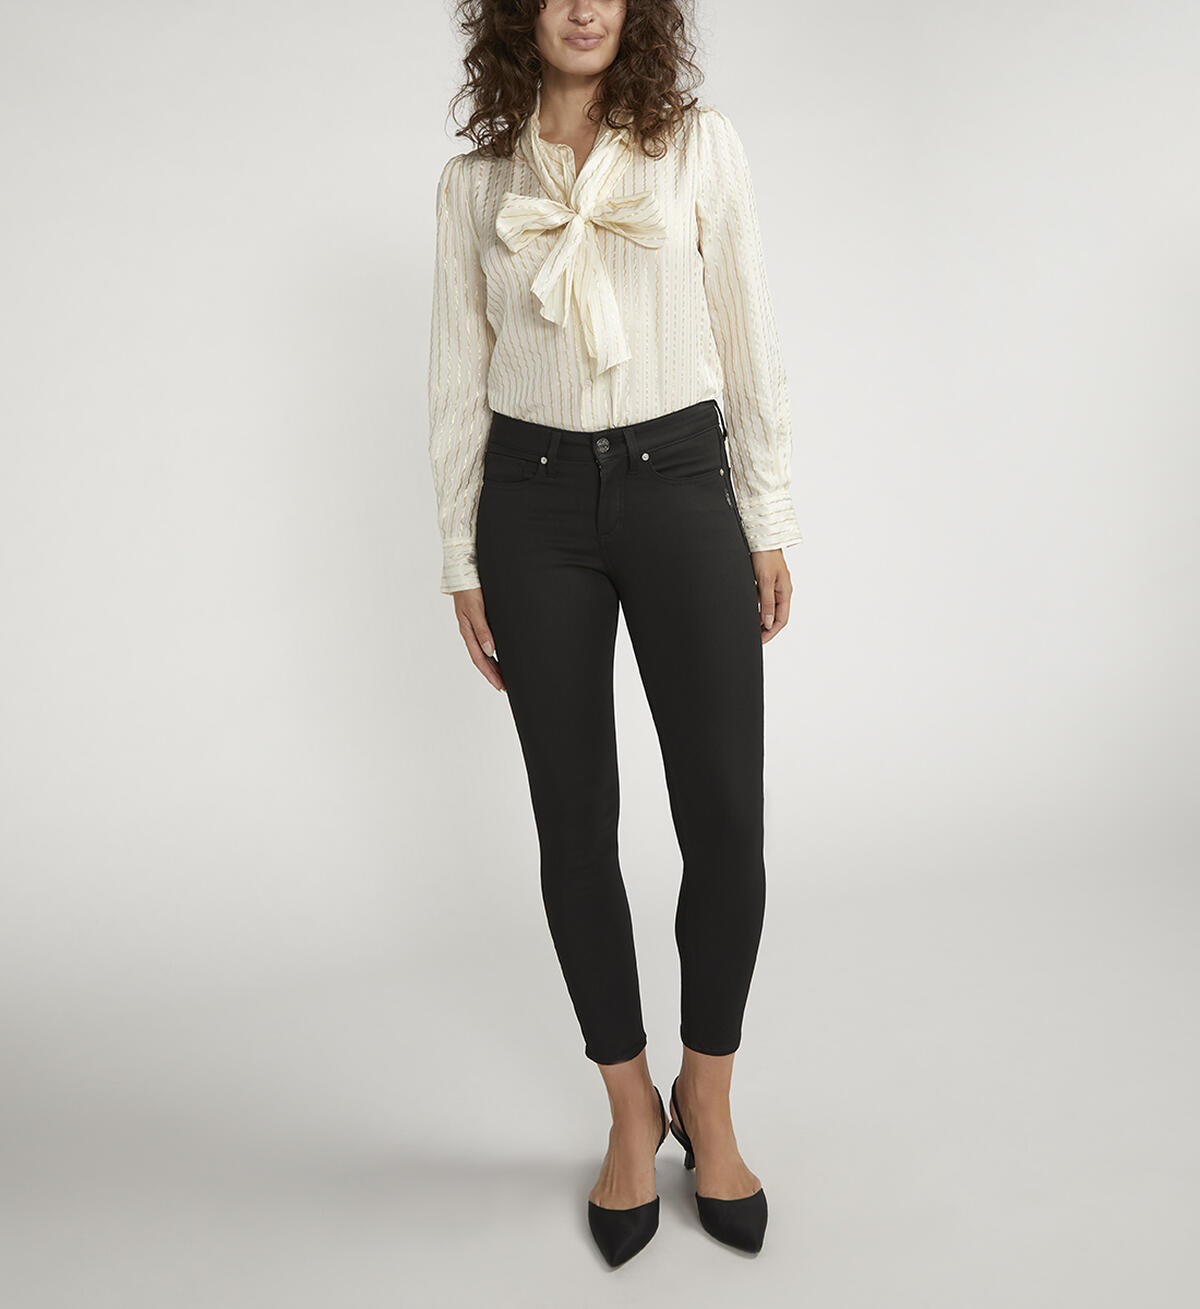 Suki Mid Rise Skinny Ankle Jeans, , hi-res image number 0